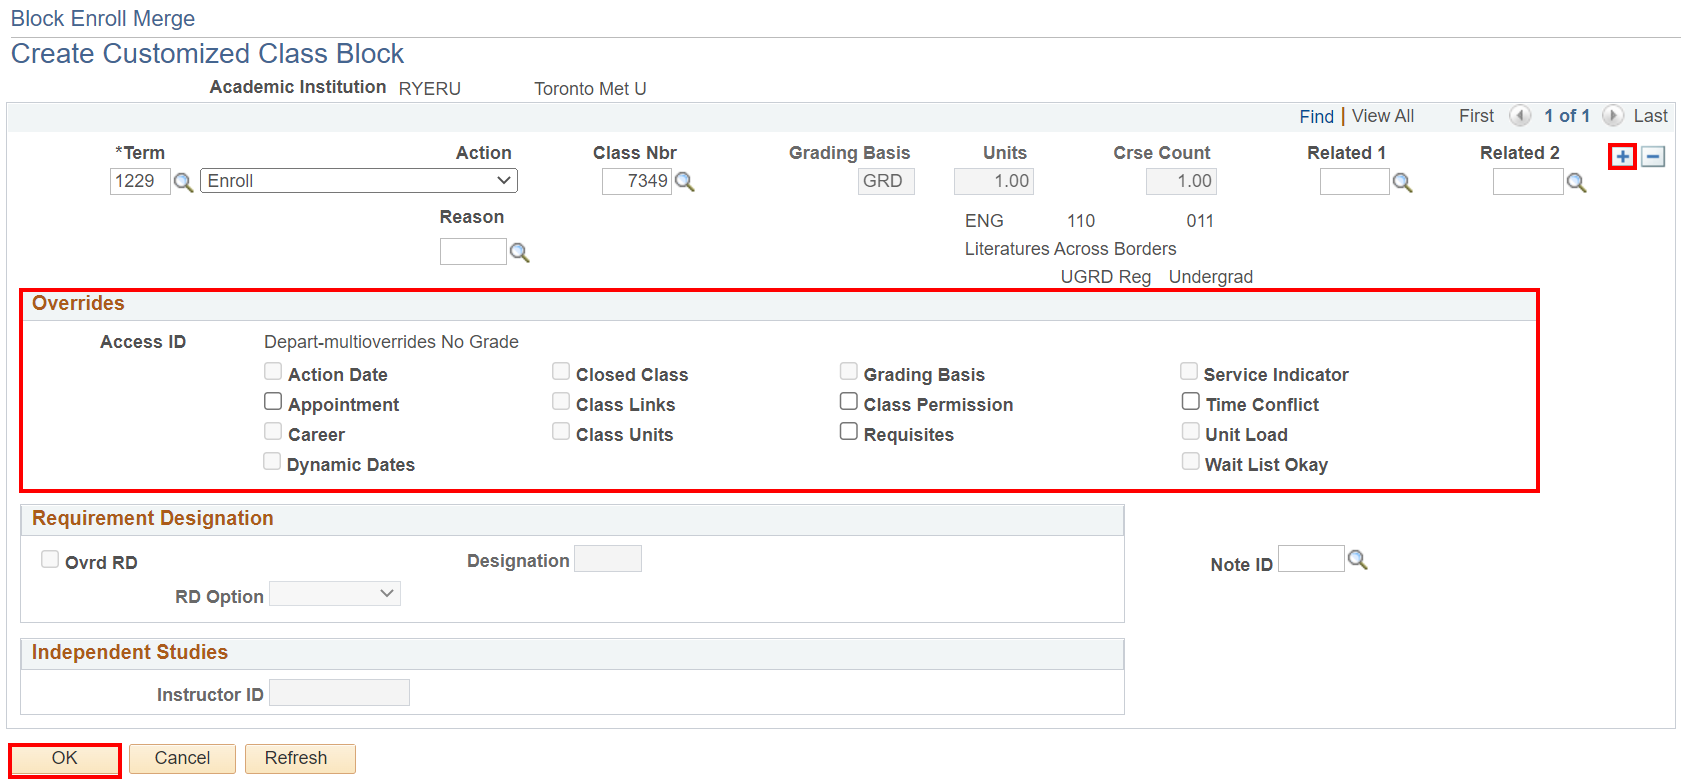 Overrides section with checkbox options on Create Customized Class Block page